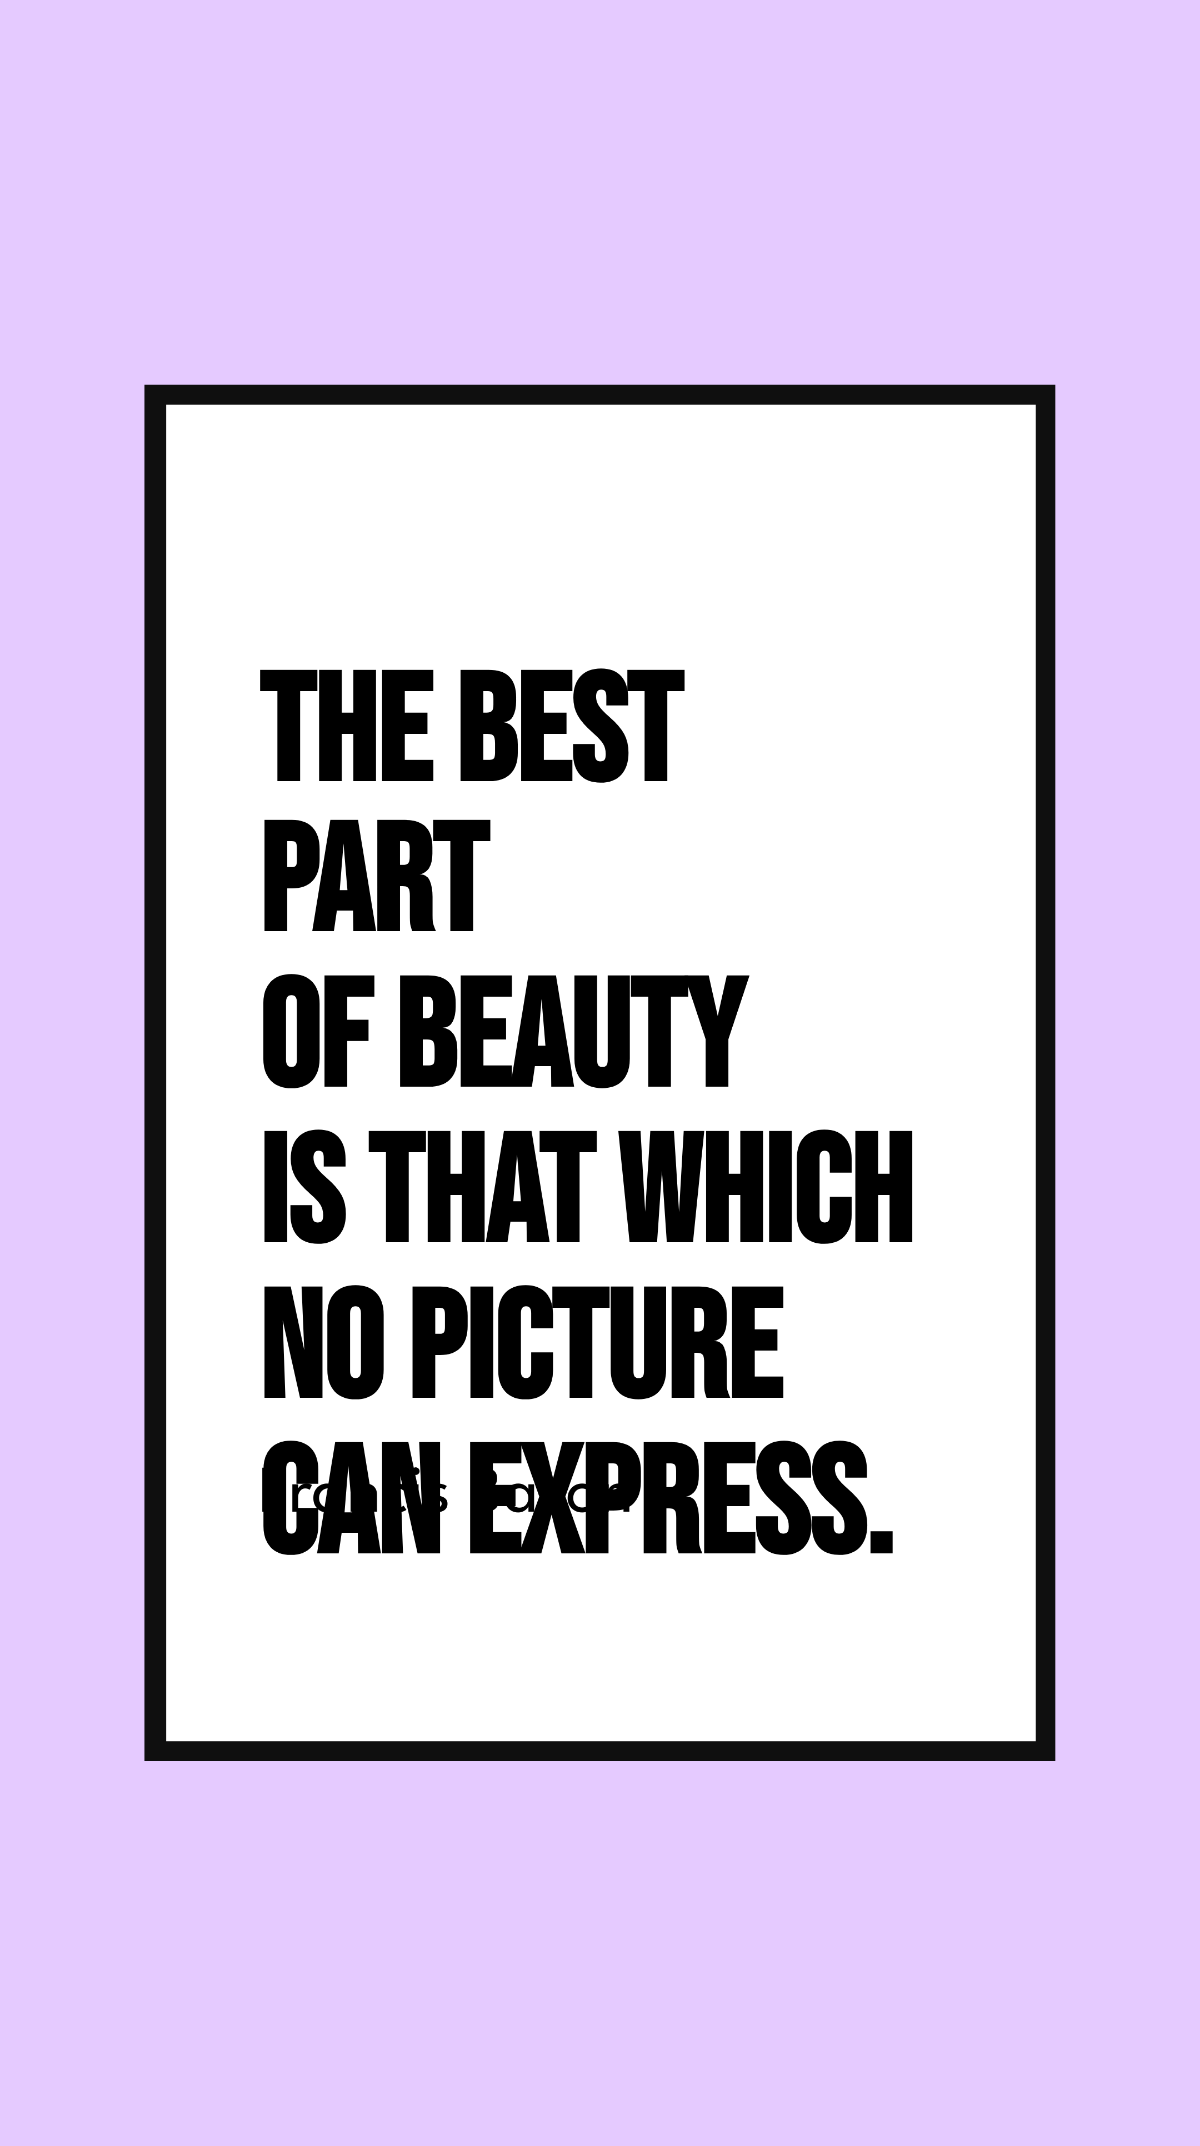 Francis Bacon - The best part of beauty is that which no picture can express. Template